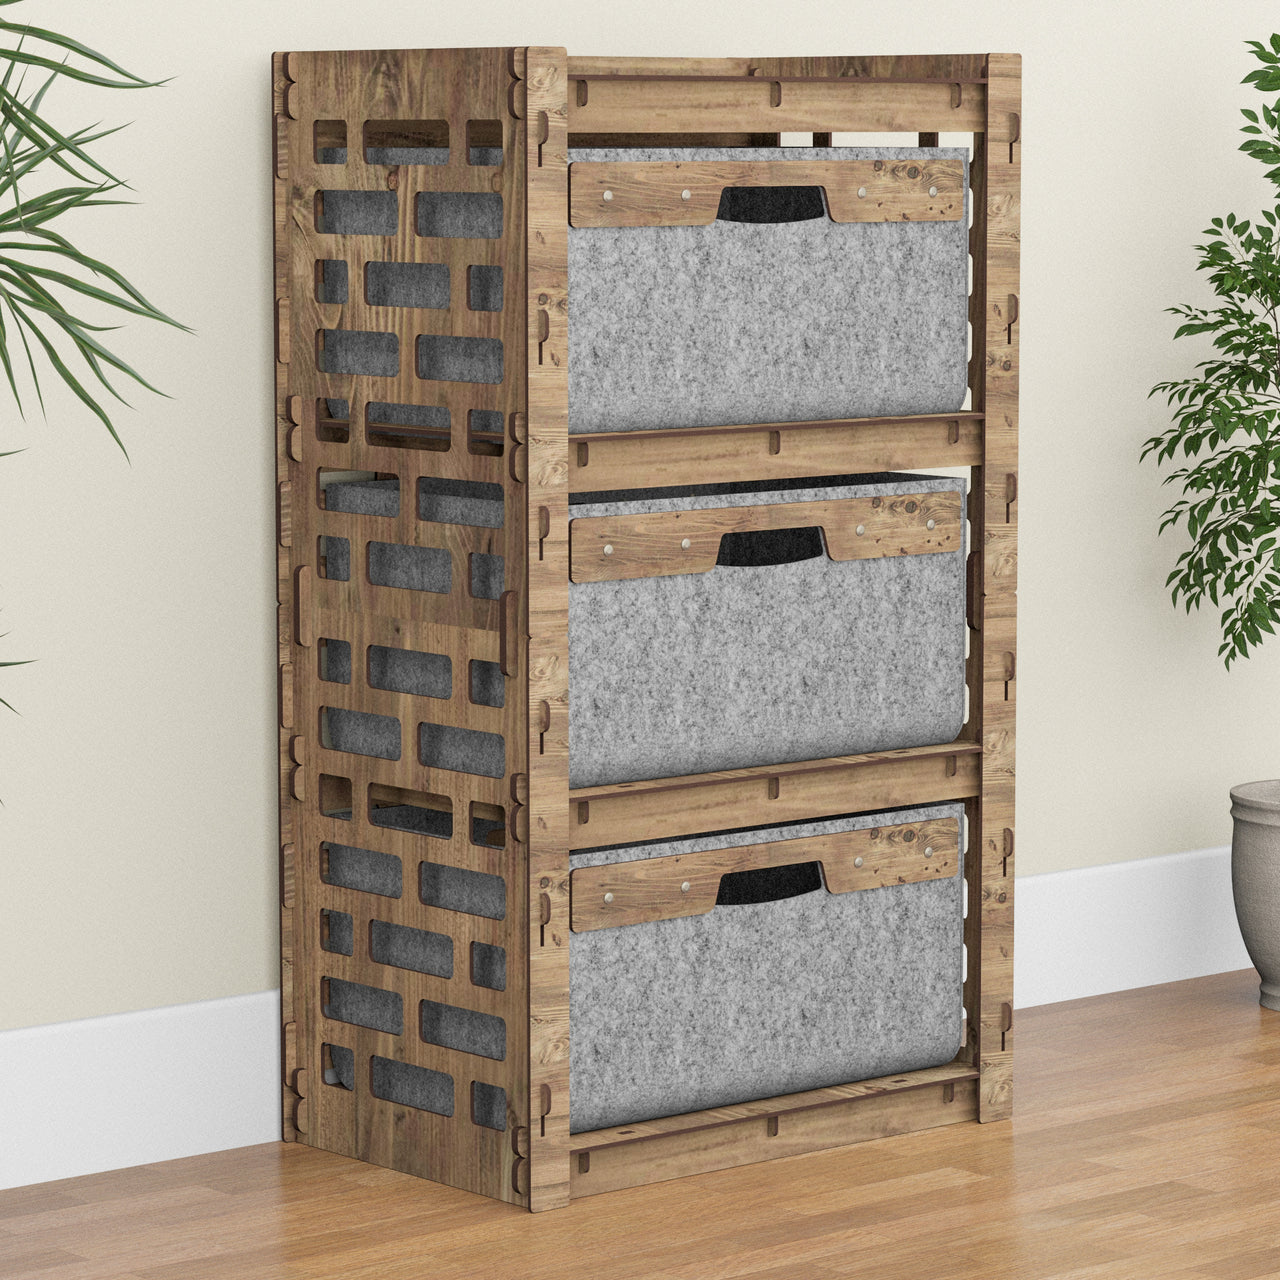 Brickwall Chest Of 3 Drawers Storage Cabinet [3 LARGE GRAY BINS]